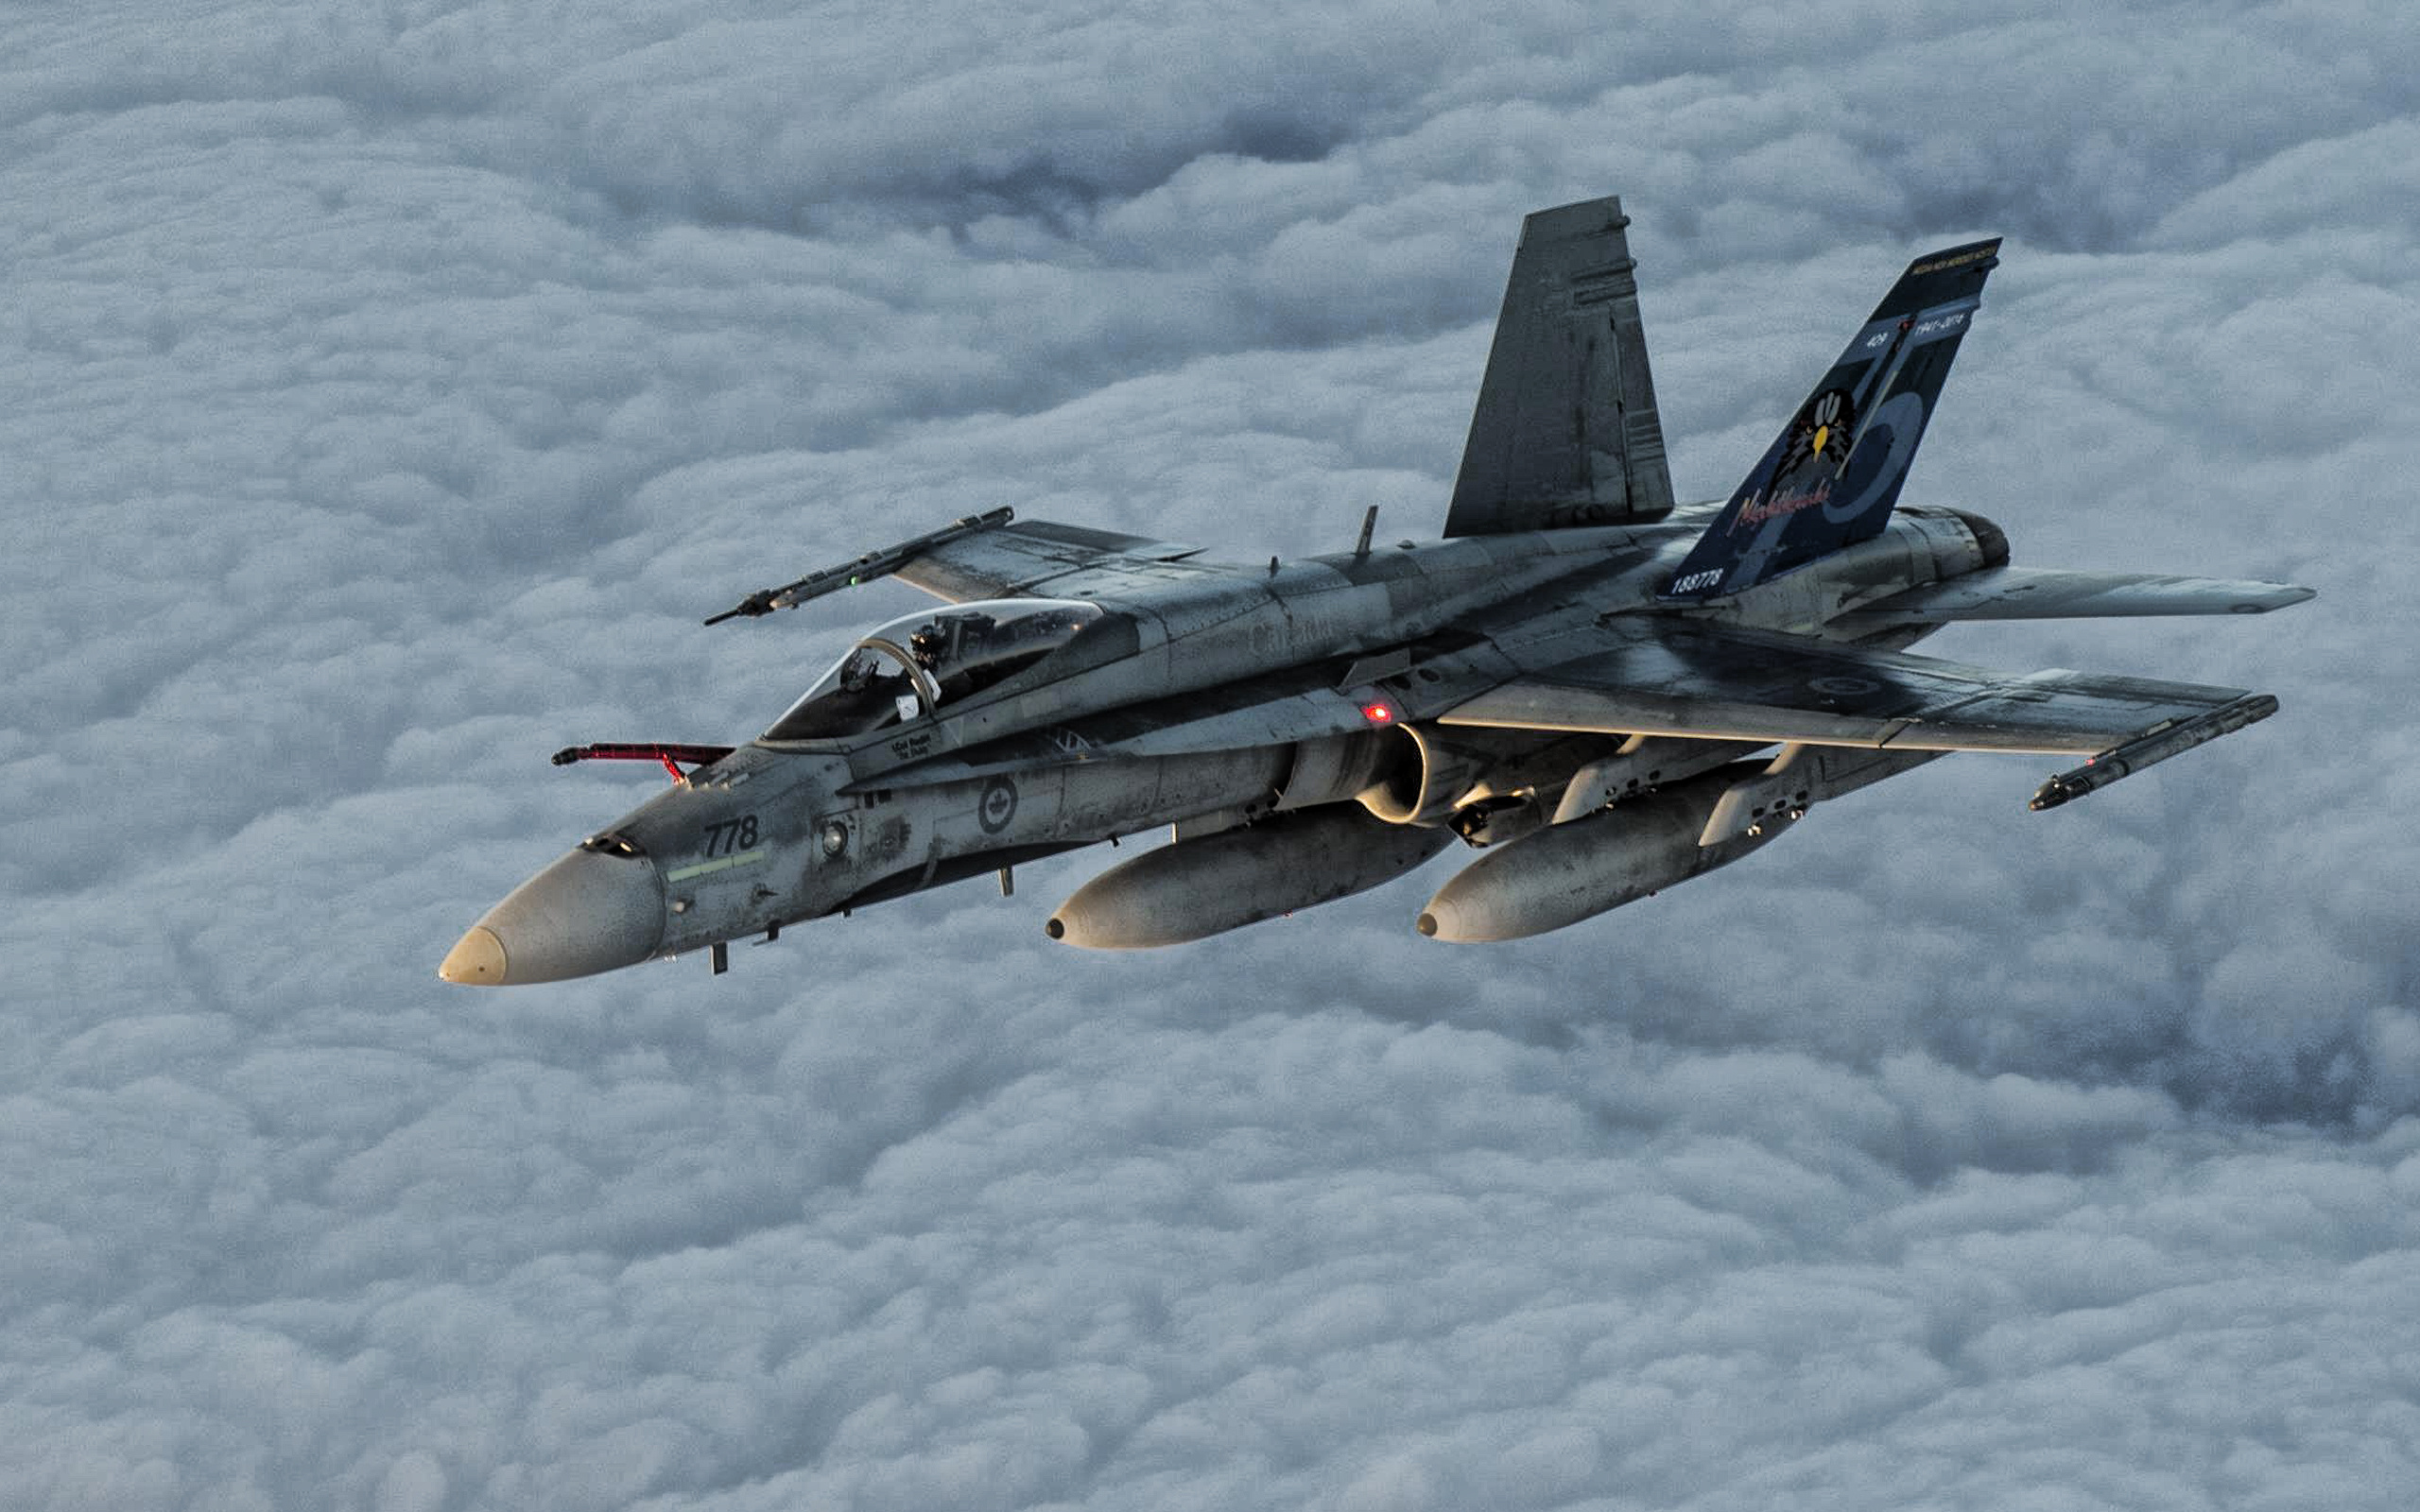 Download wallpapers McDonnell Douglas FA-18 Hornet, Canadian Air Force, fighter bomber, military aircraft, Canada, Boeing FA-18 Super Hornet for desktop with resolution. High Quality HD pictures wallpapers 2560x1600